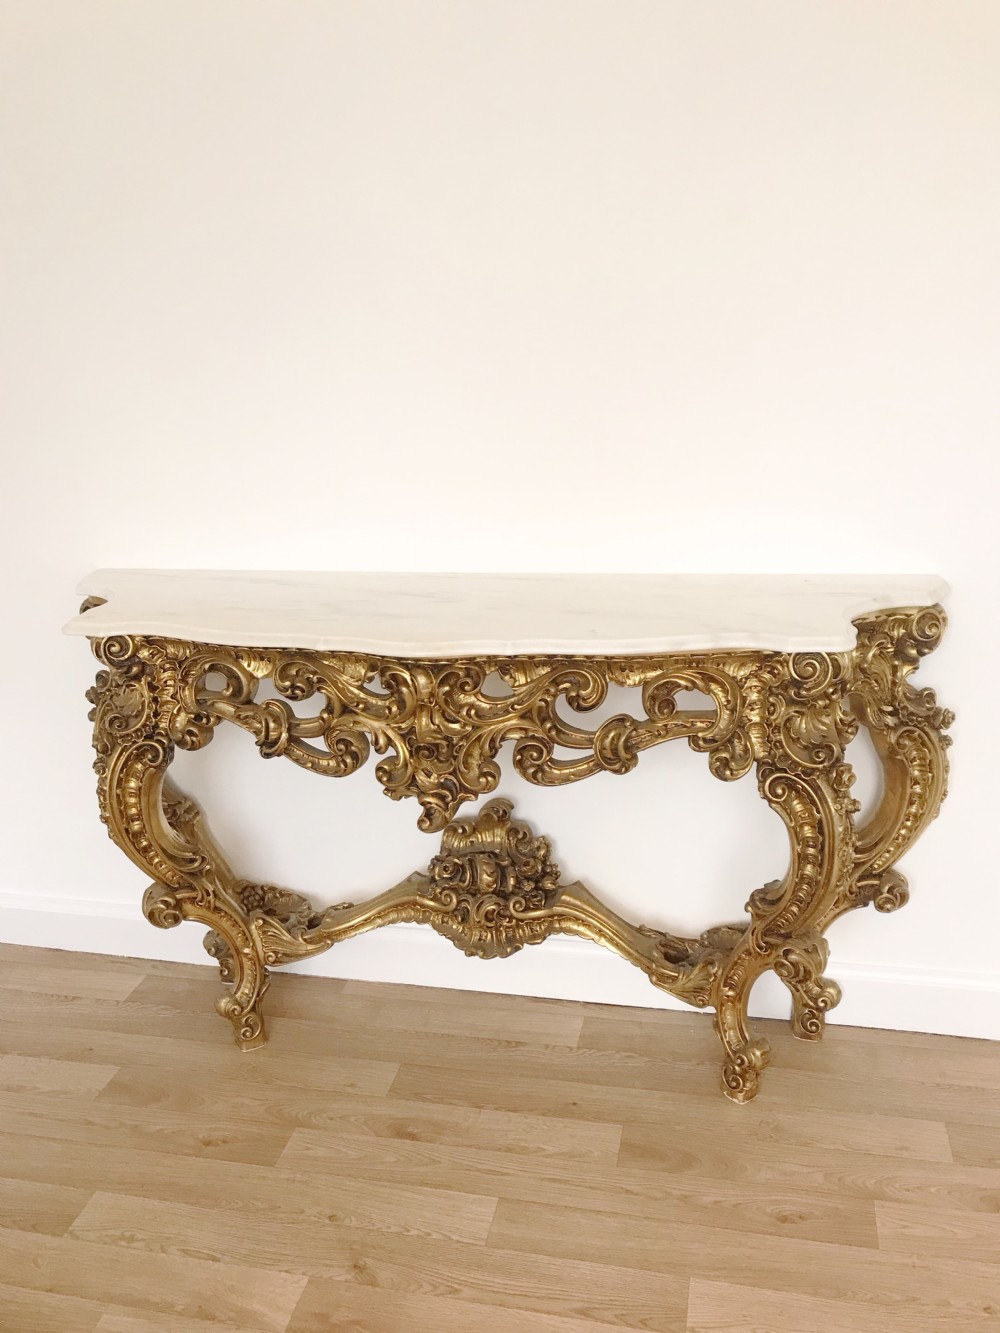 huge rococo gilt wooden carved console table white carrara marble top